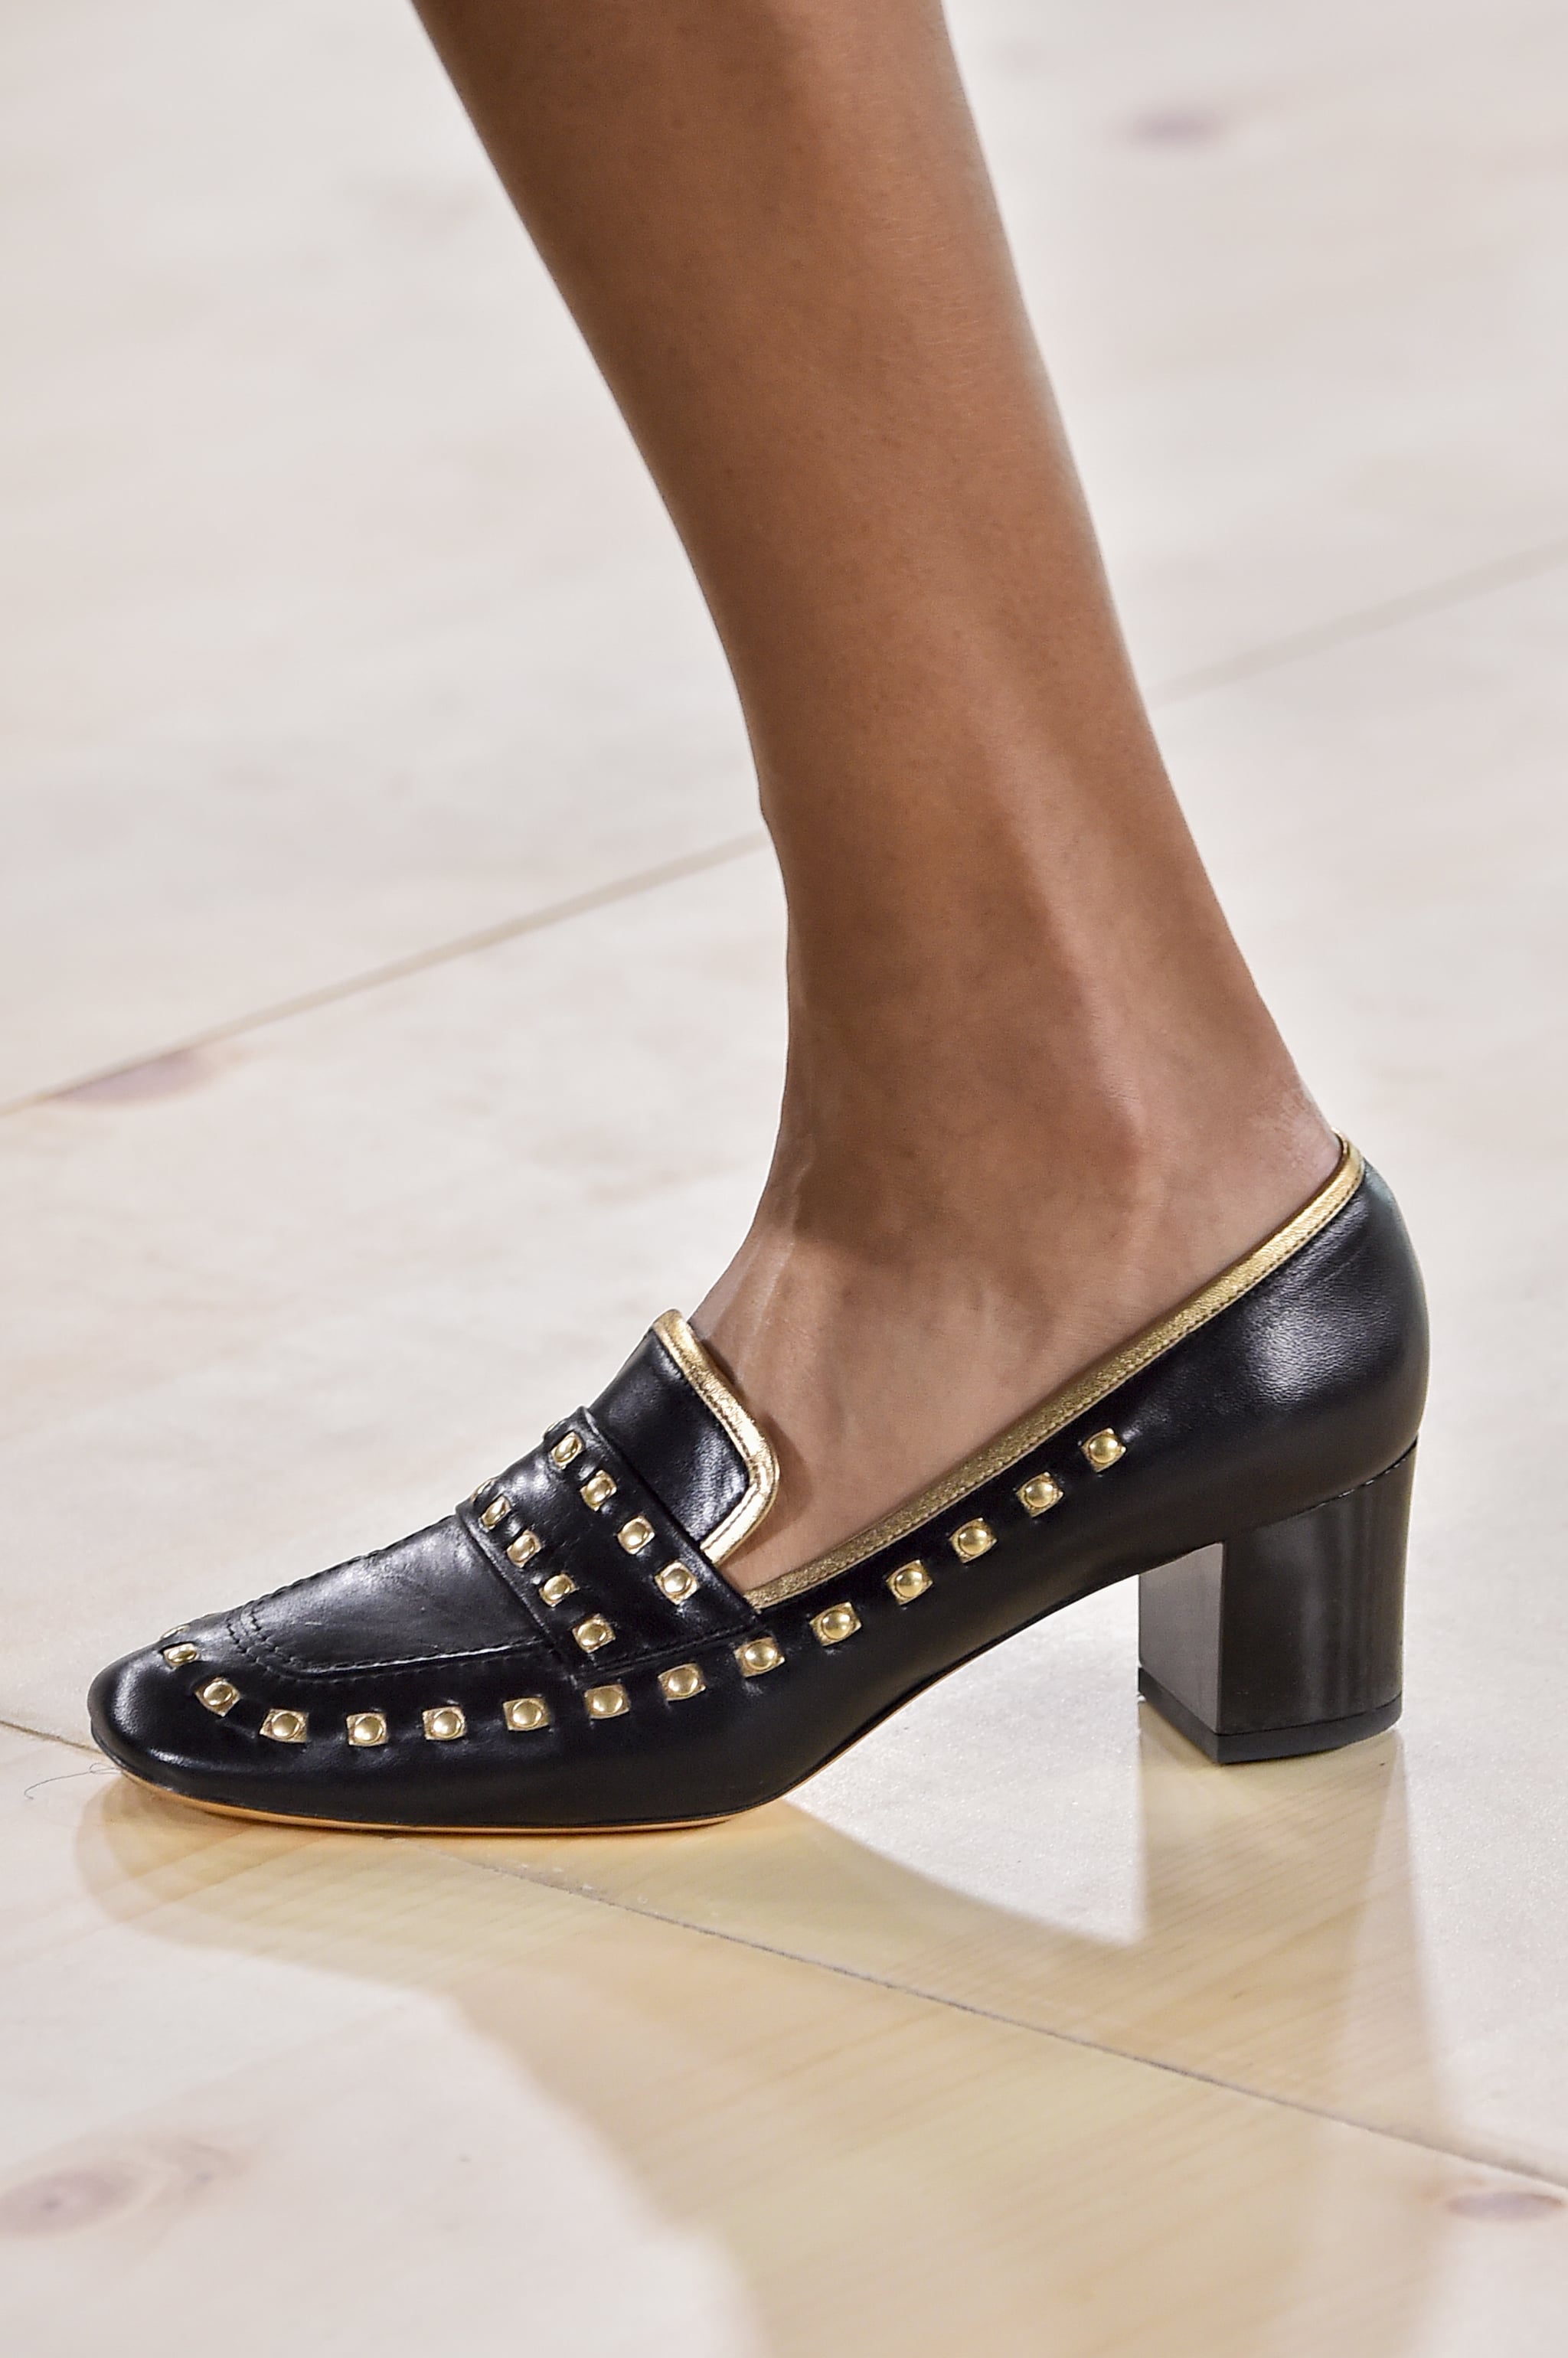 Tory Burch Fall '19 Runway | These Were the Best Shoes at Fashion Week, and  They Deserve an Encore | POPSUGAR Fashion Photo 202